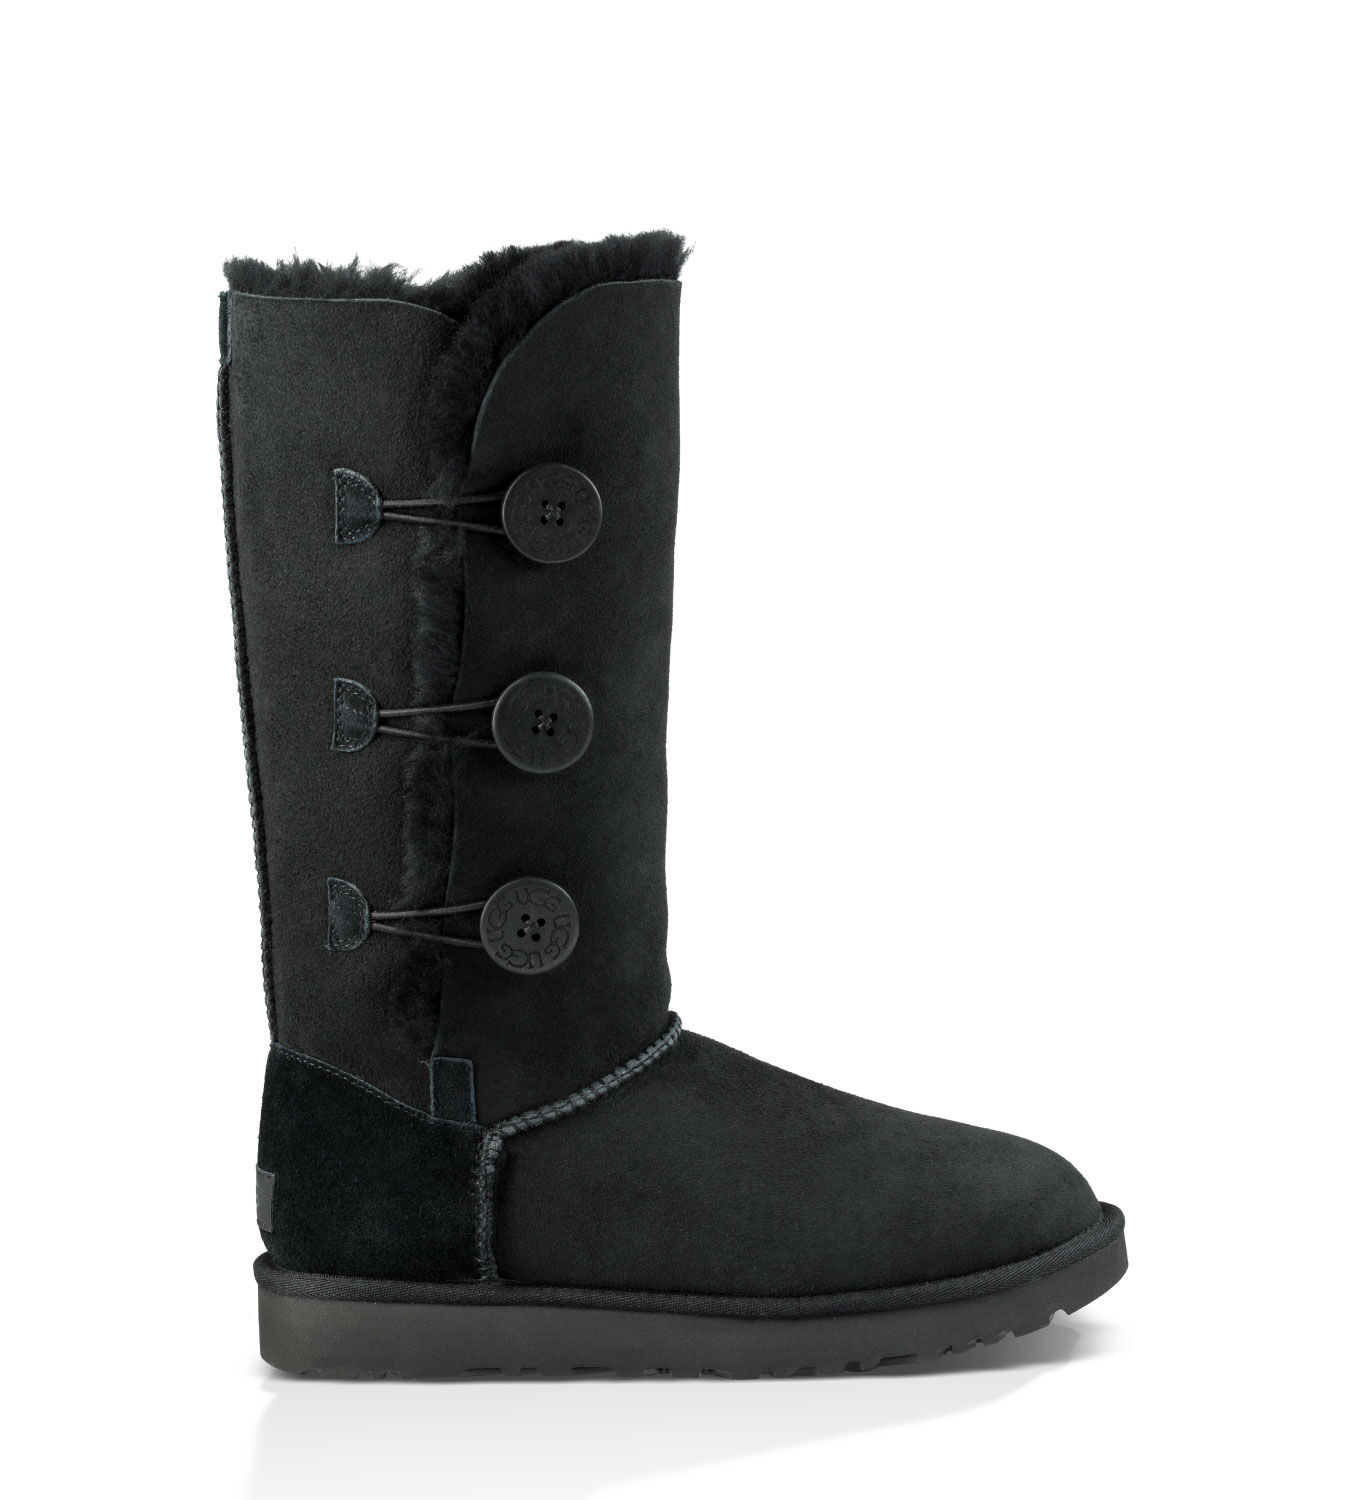 black and grey ugg boots